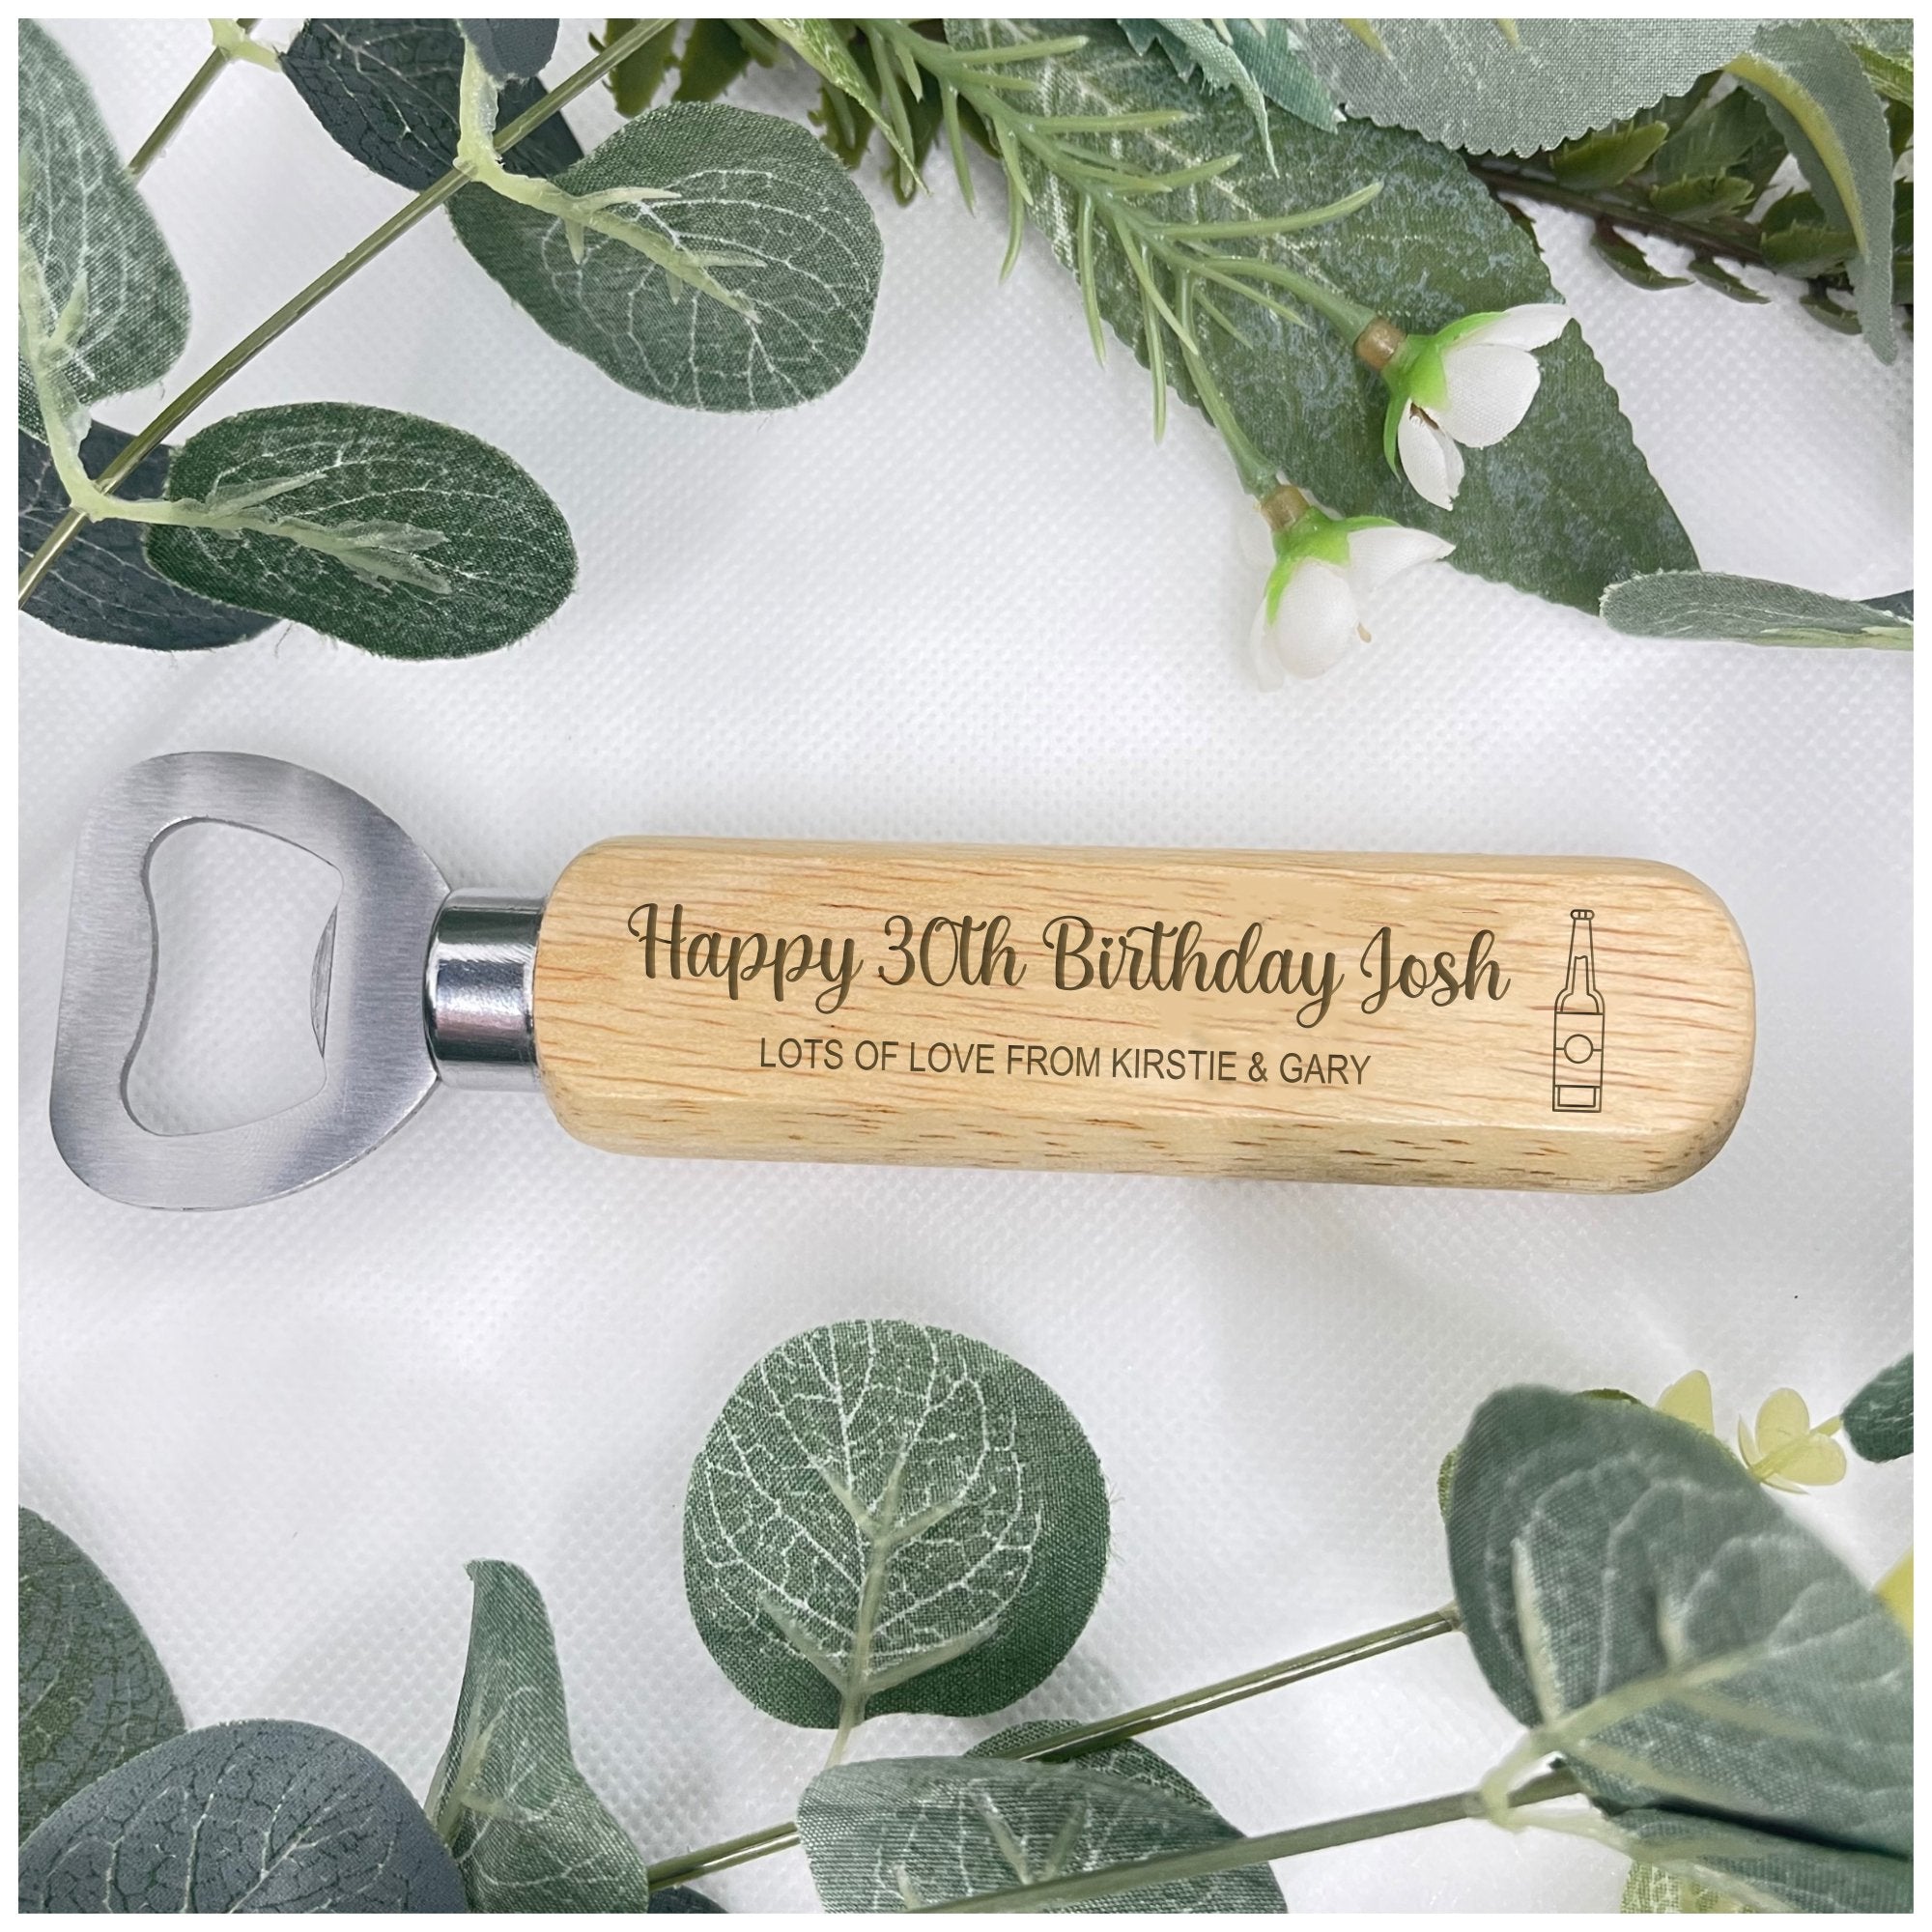 Personalised gifts for him by Rowland Designs, including Personalised bottle openers, Funny Bar Signs and much much more! 